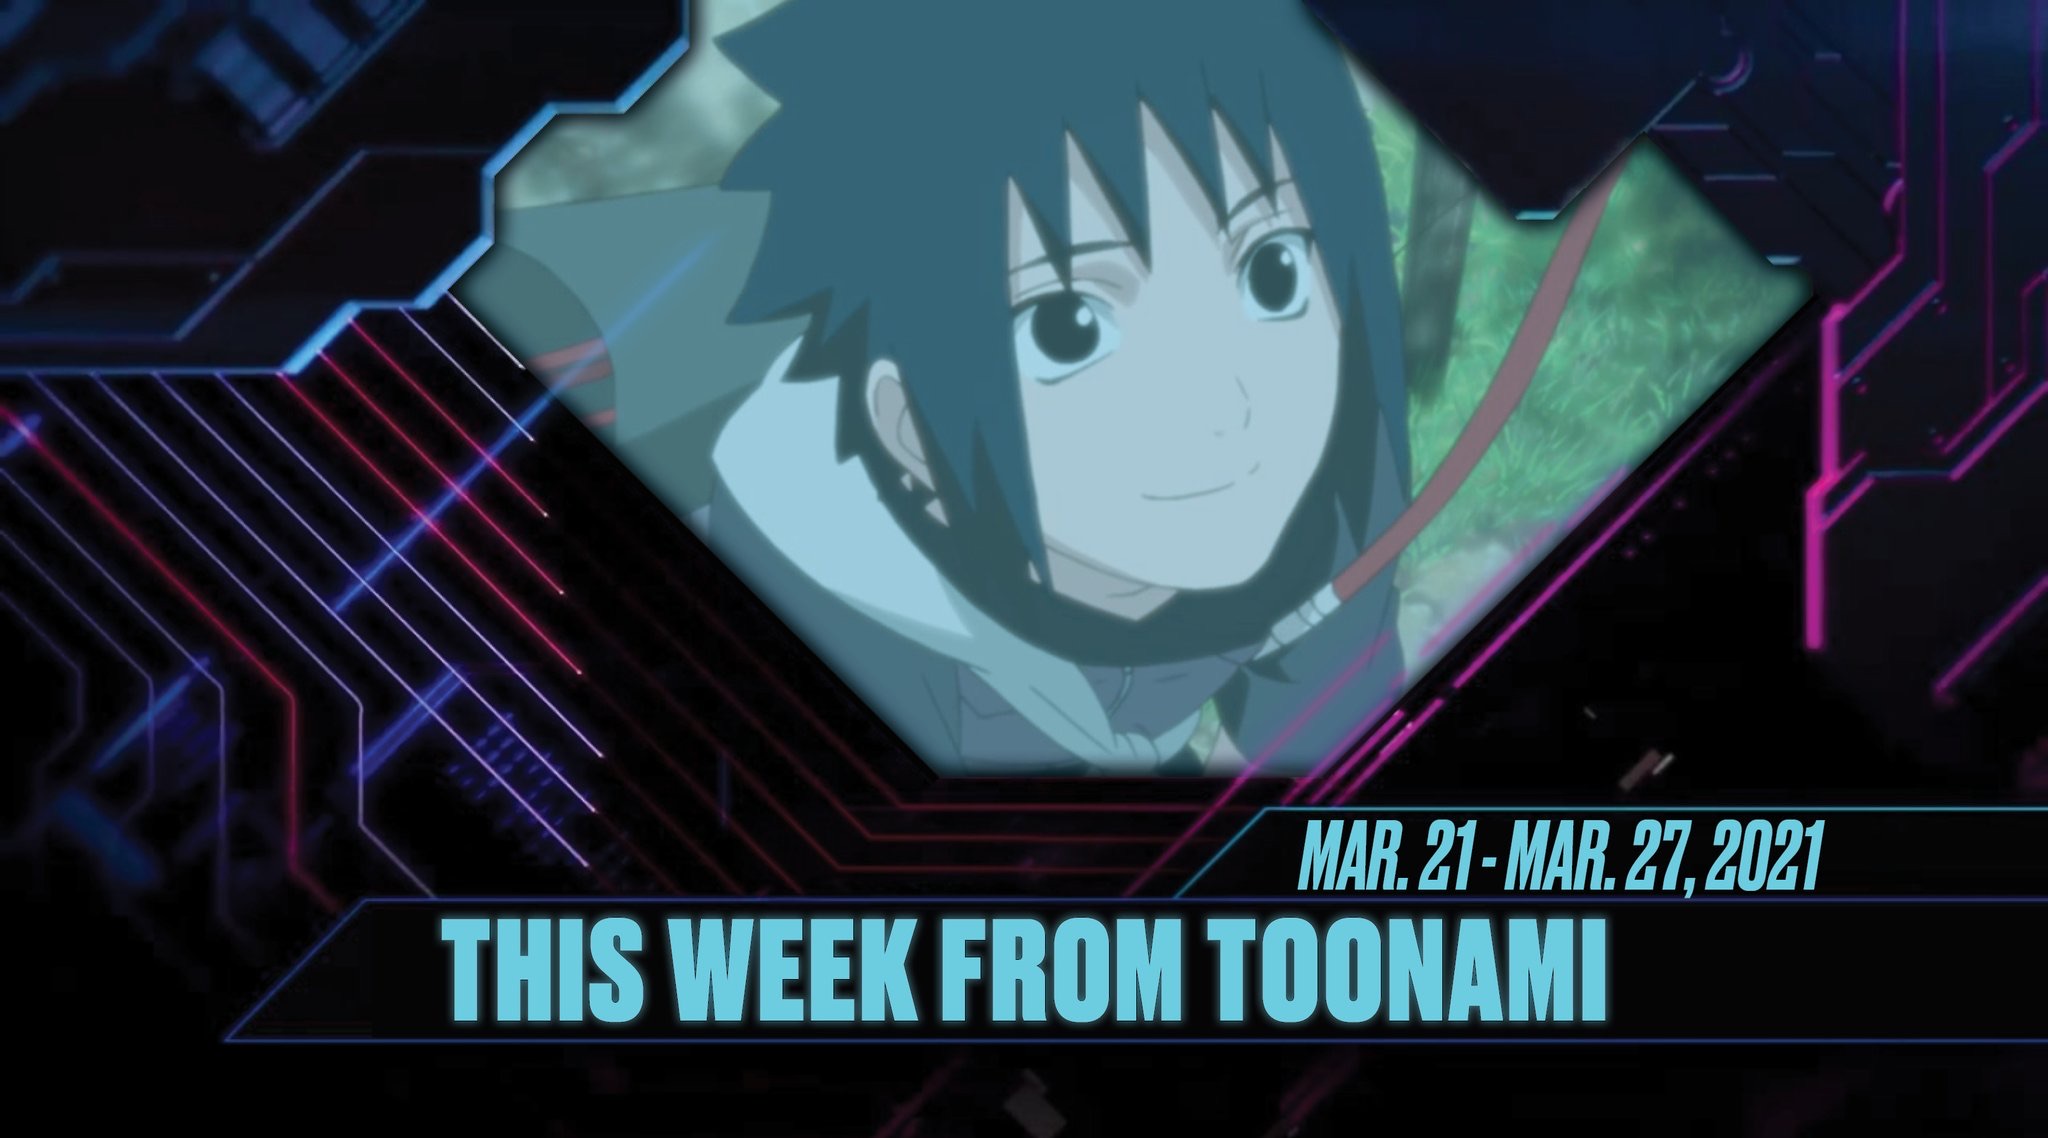 Funimation - We're so pumped to reveal two new characters joining